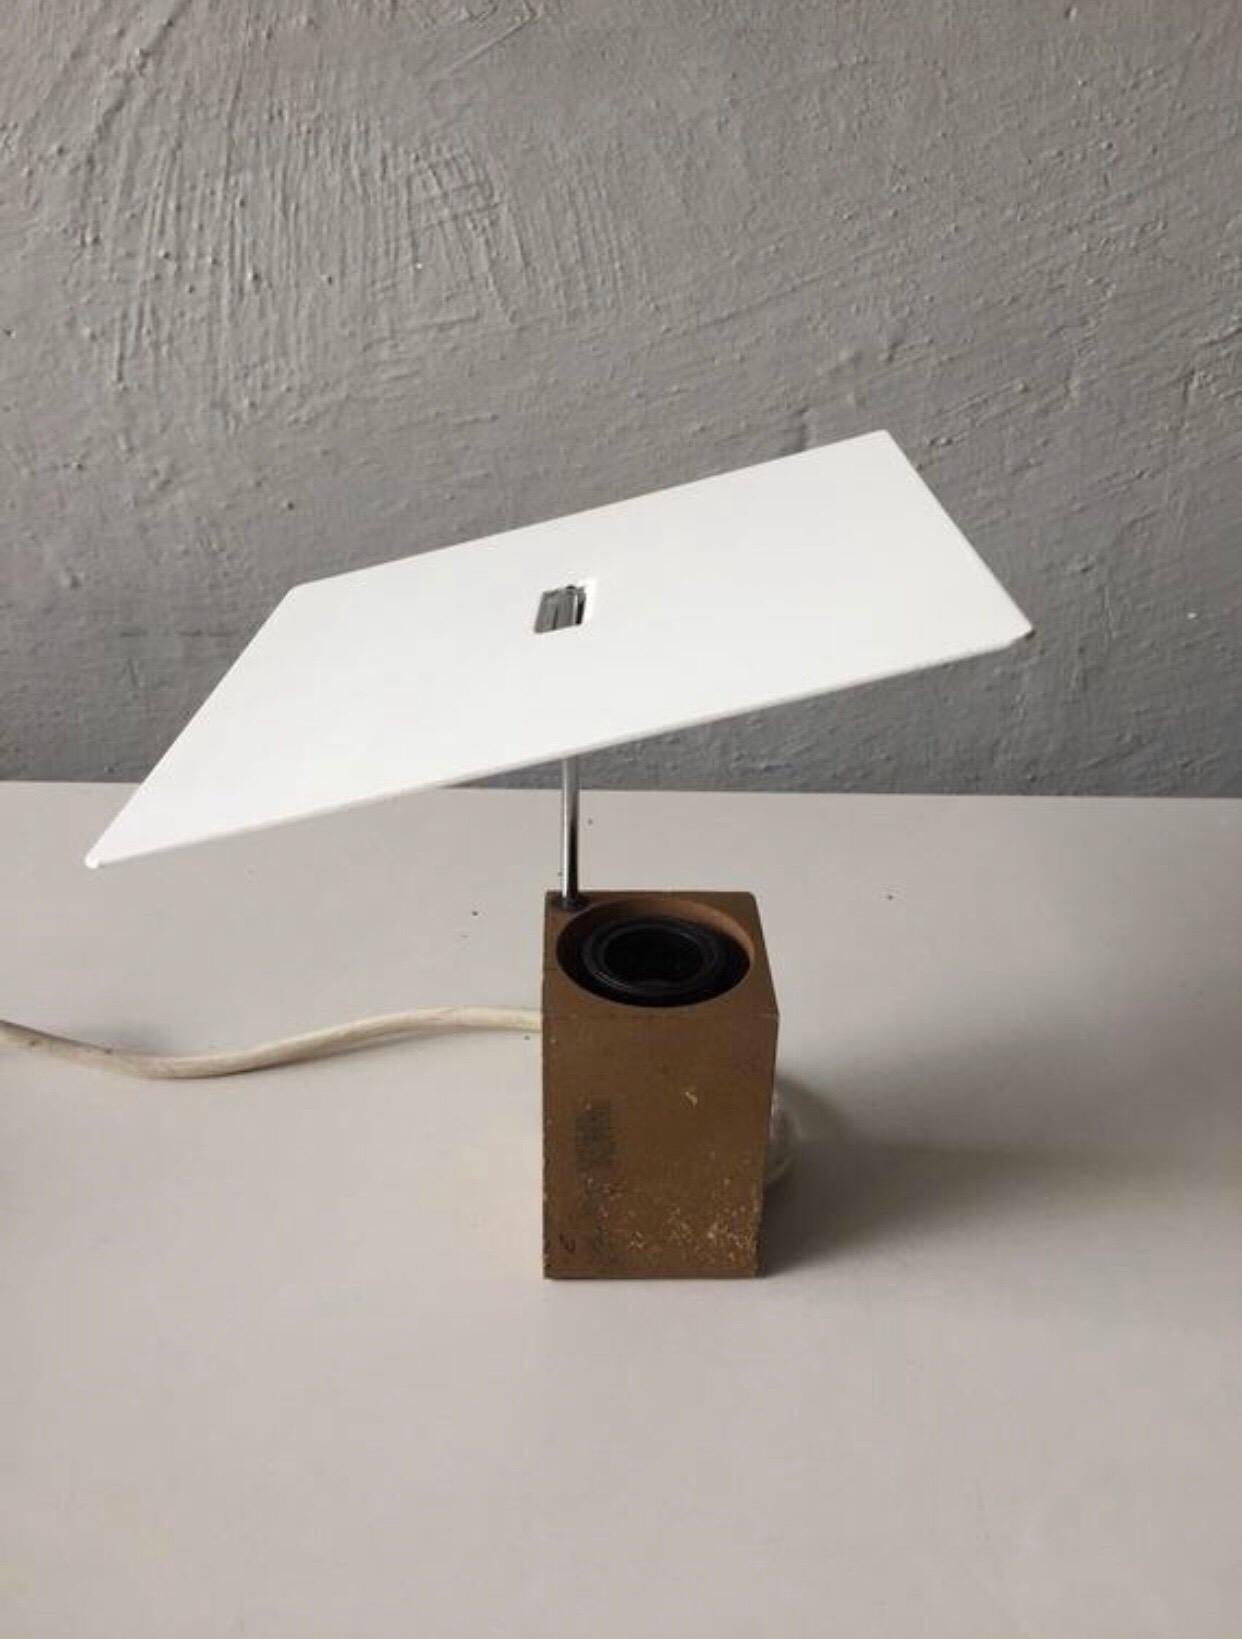 Manufacturer/Designer: Arteluce Milano, Antonio Macchi Cassia, 1970s, Italy
Model no: 610
This spectacular table lamp designed as approach of a sculpture with thin minimalist white metal squared lampshade and a brown stone base.
Its lampshade is